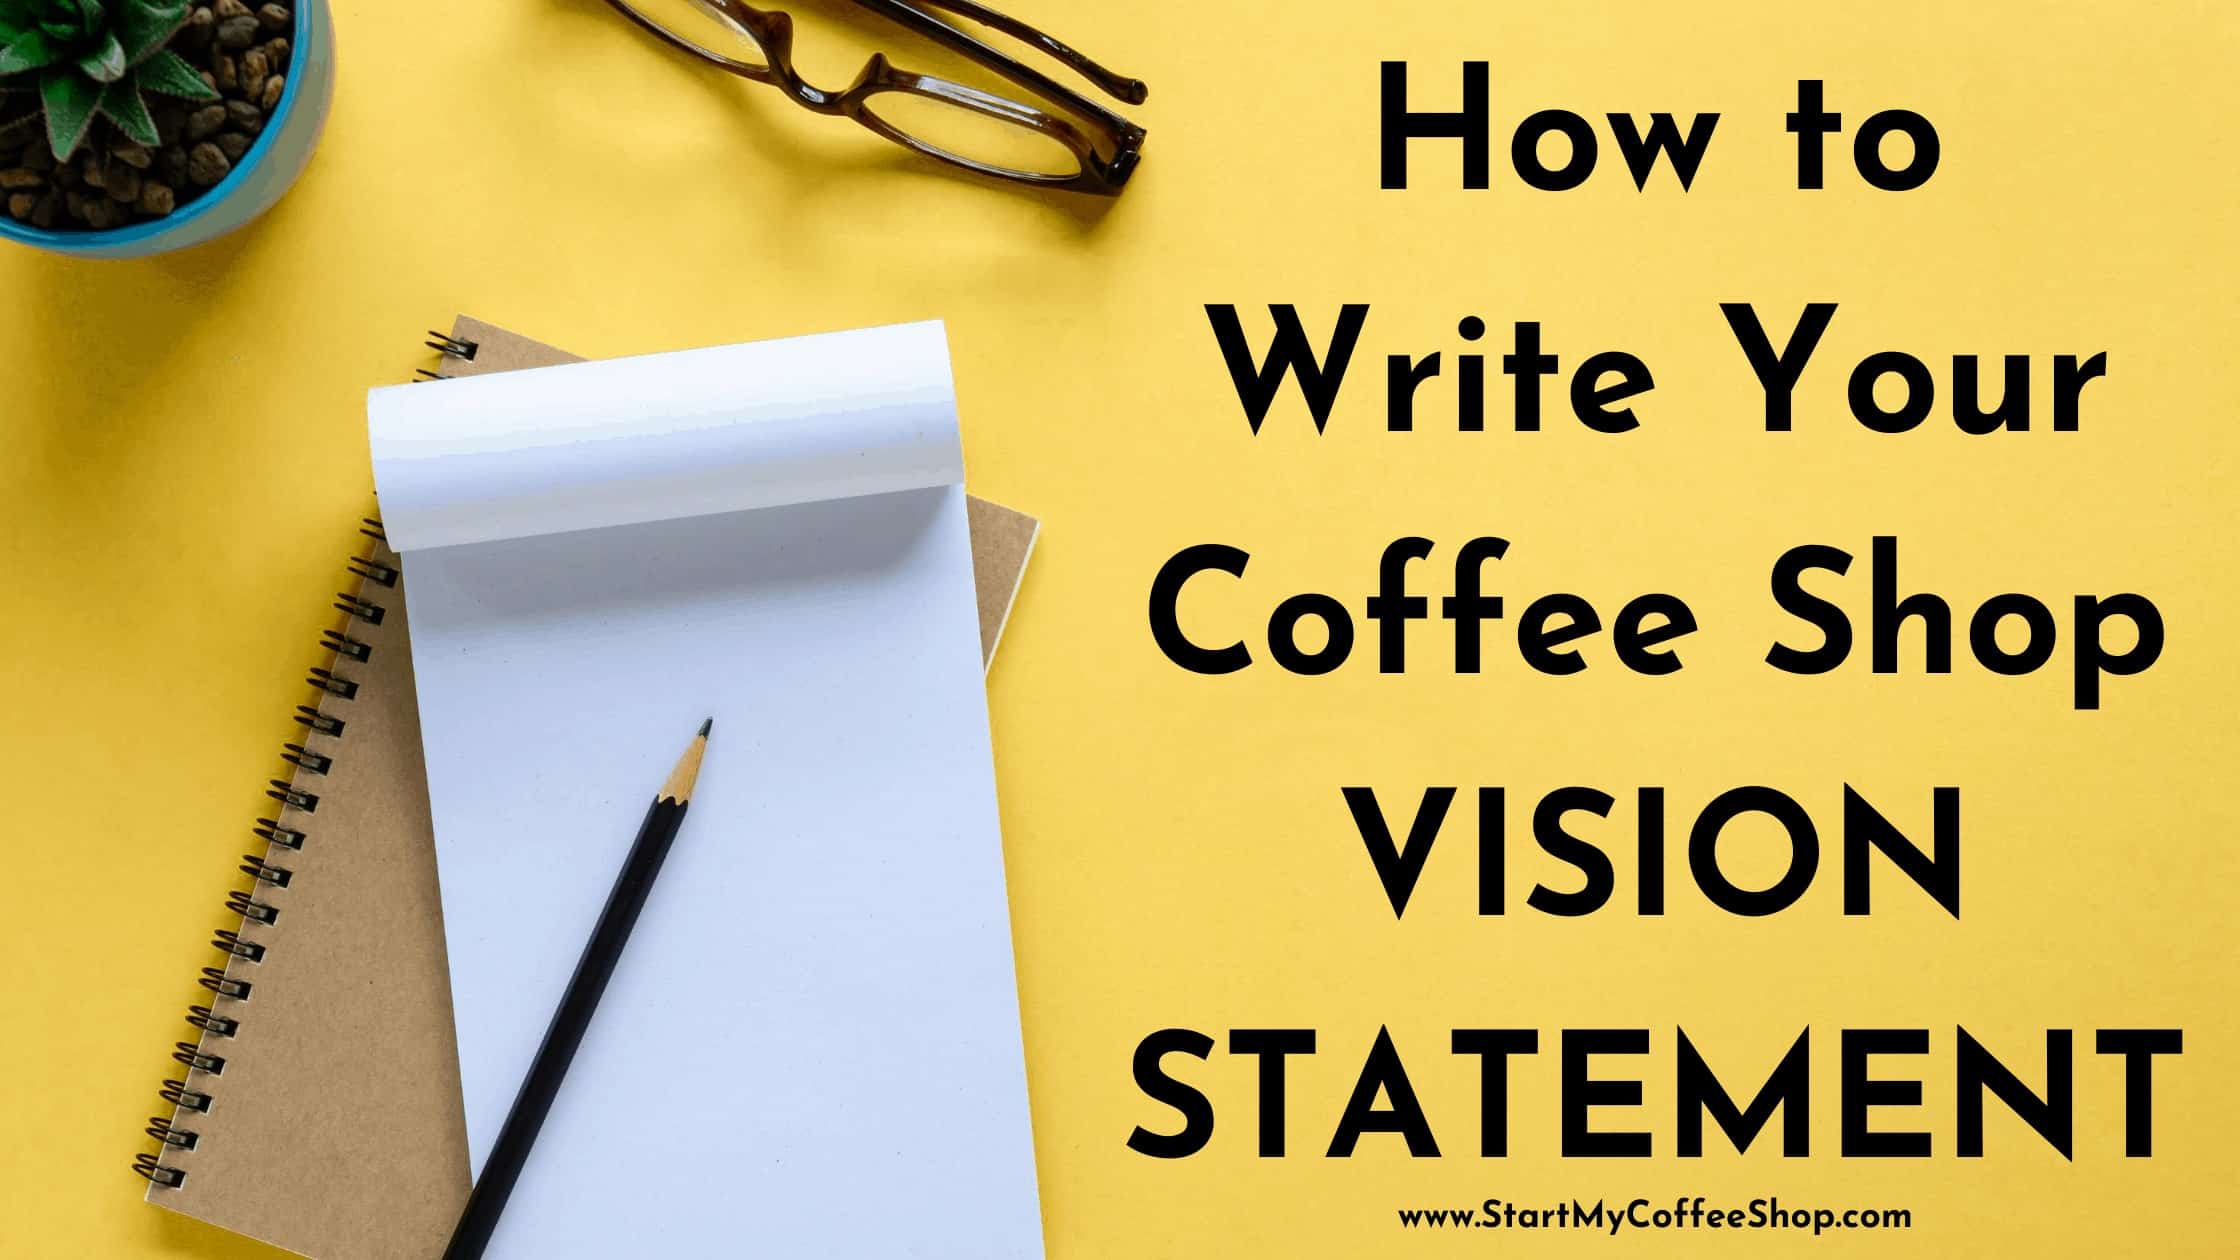 How To Write Your Coffee Shop Vision Statement – Start My Coffee Shop